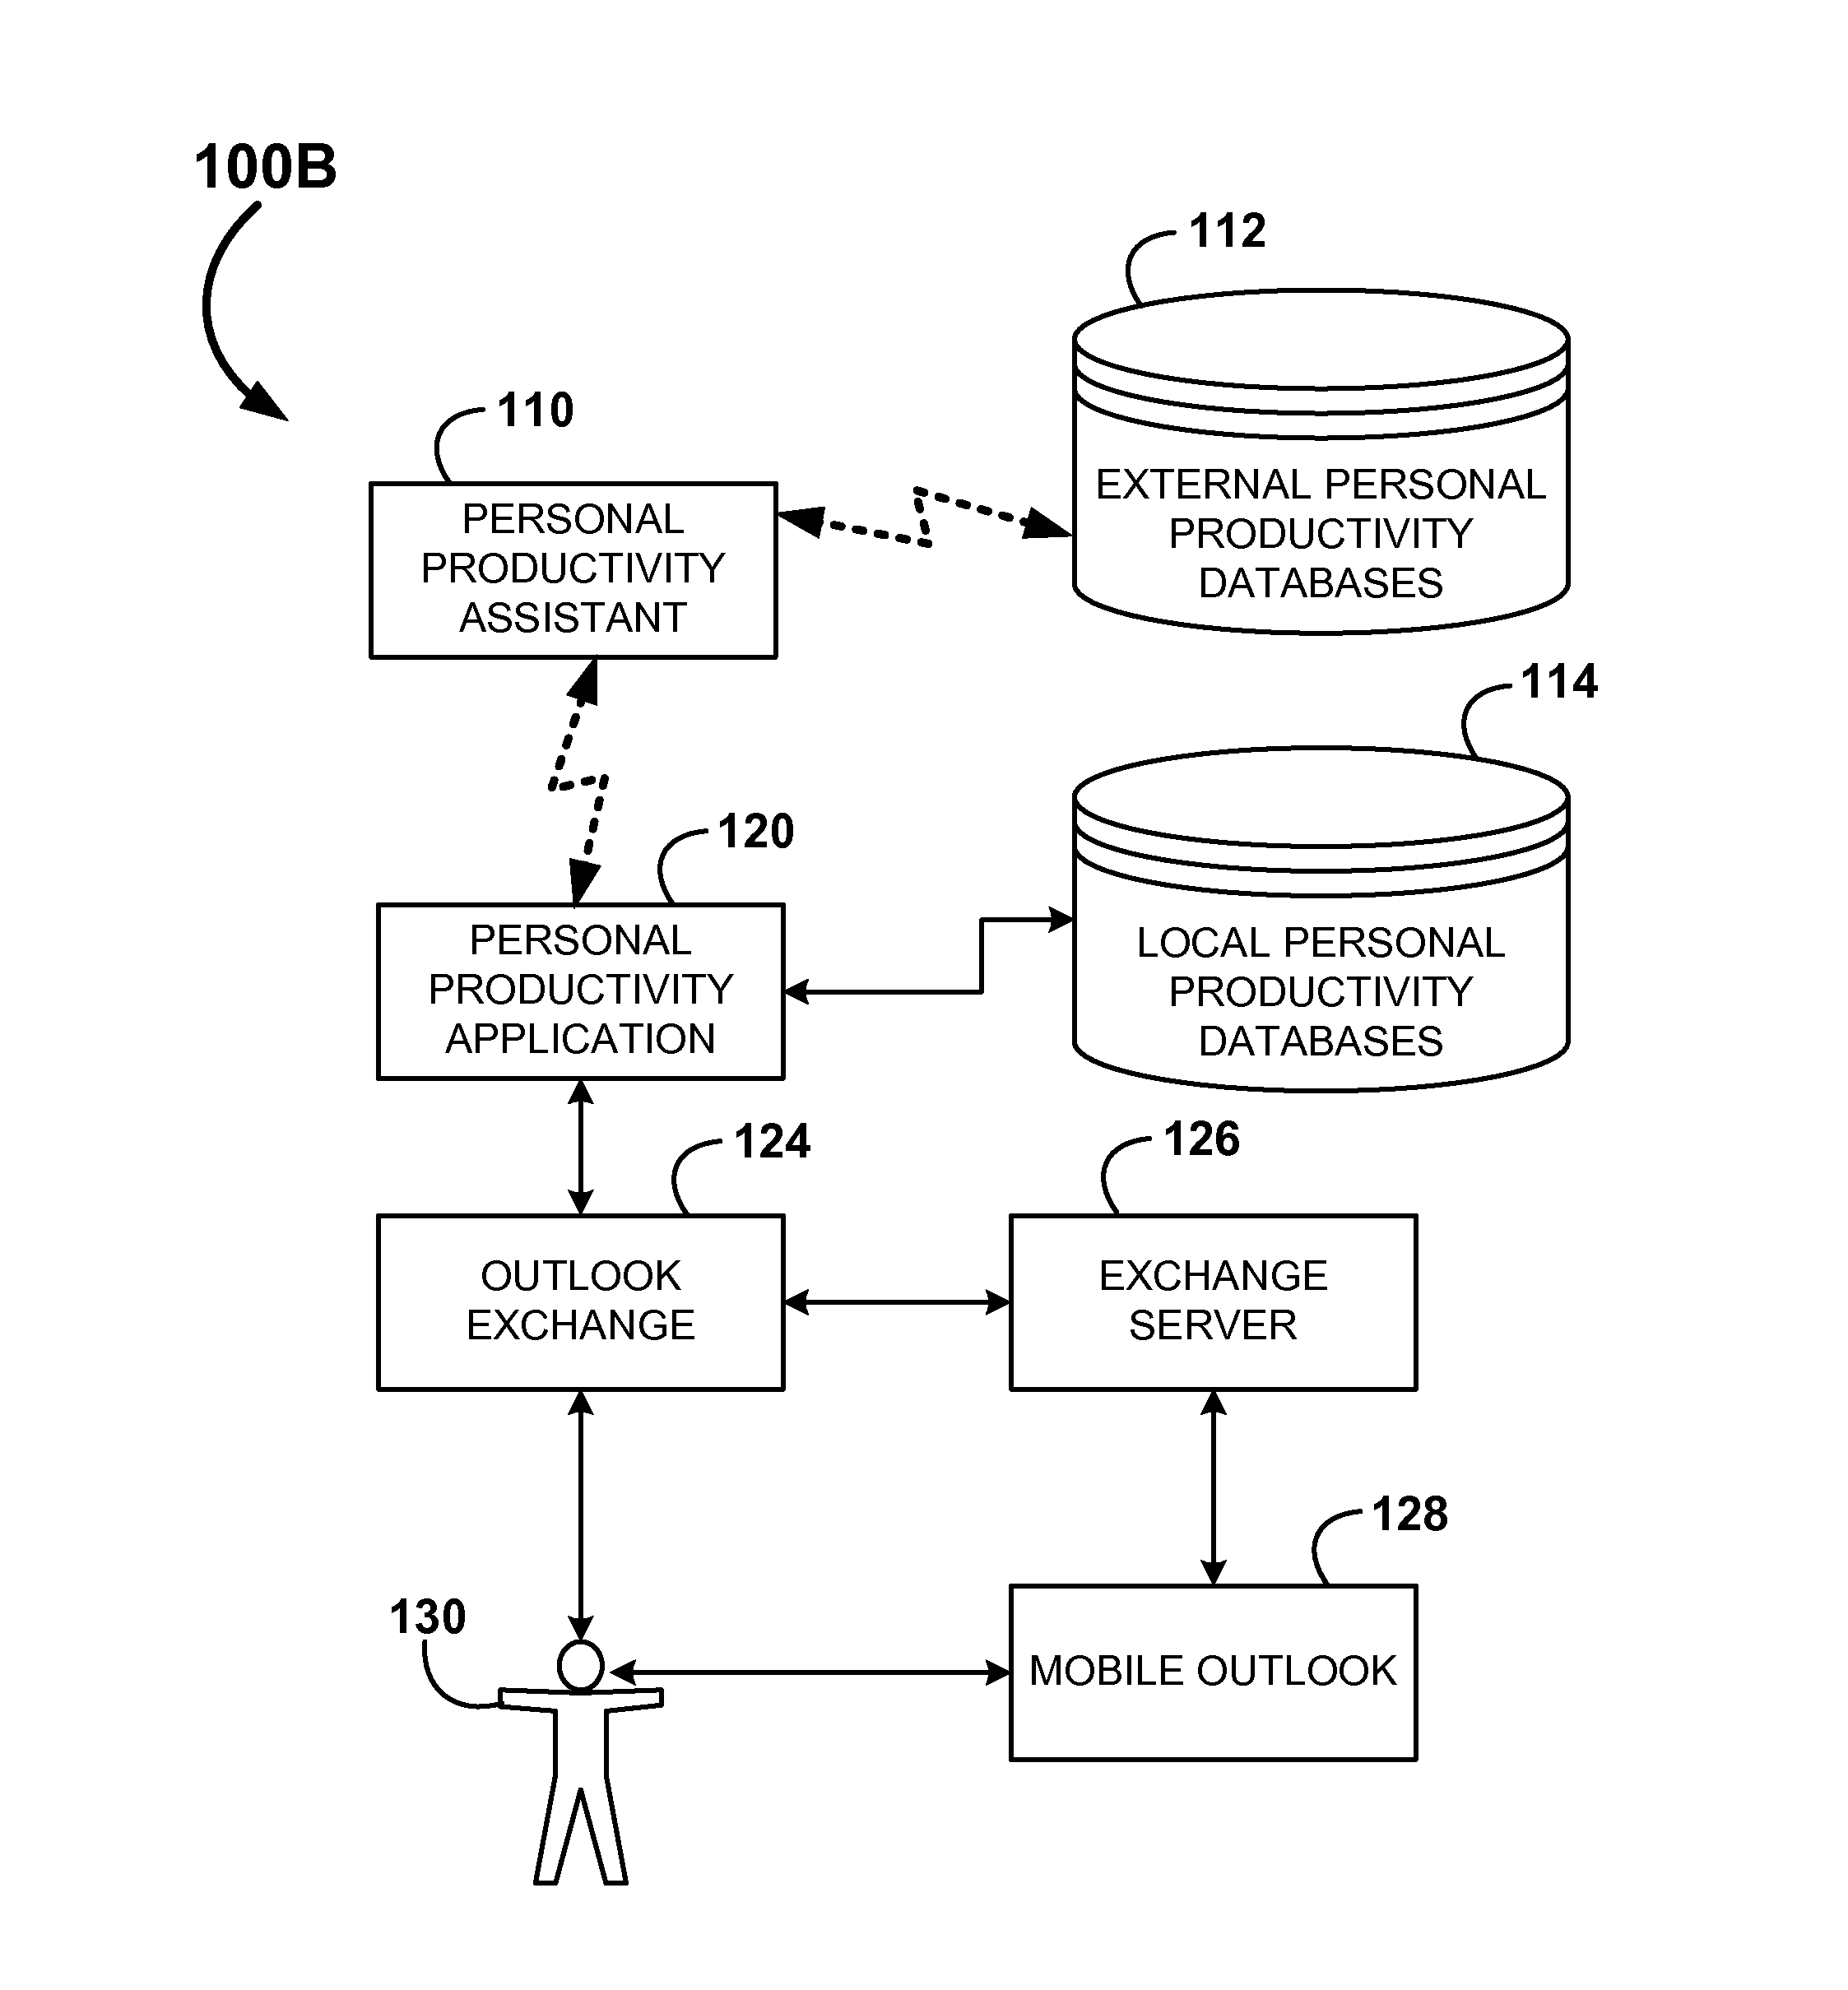 Systems and Methods for Augmenting Data in a Personal Productivity Application